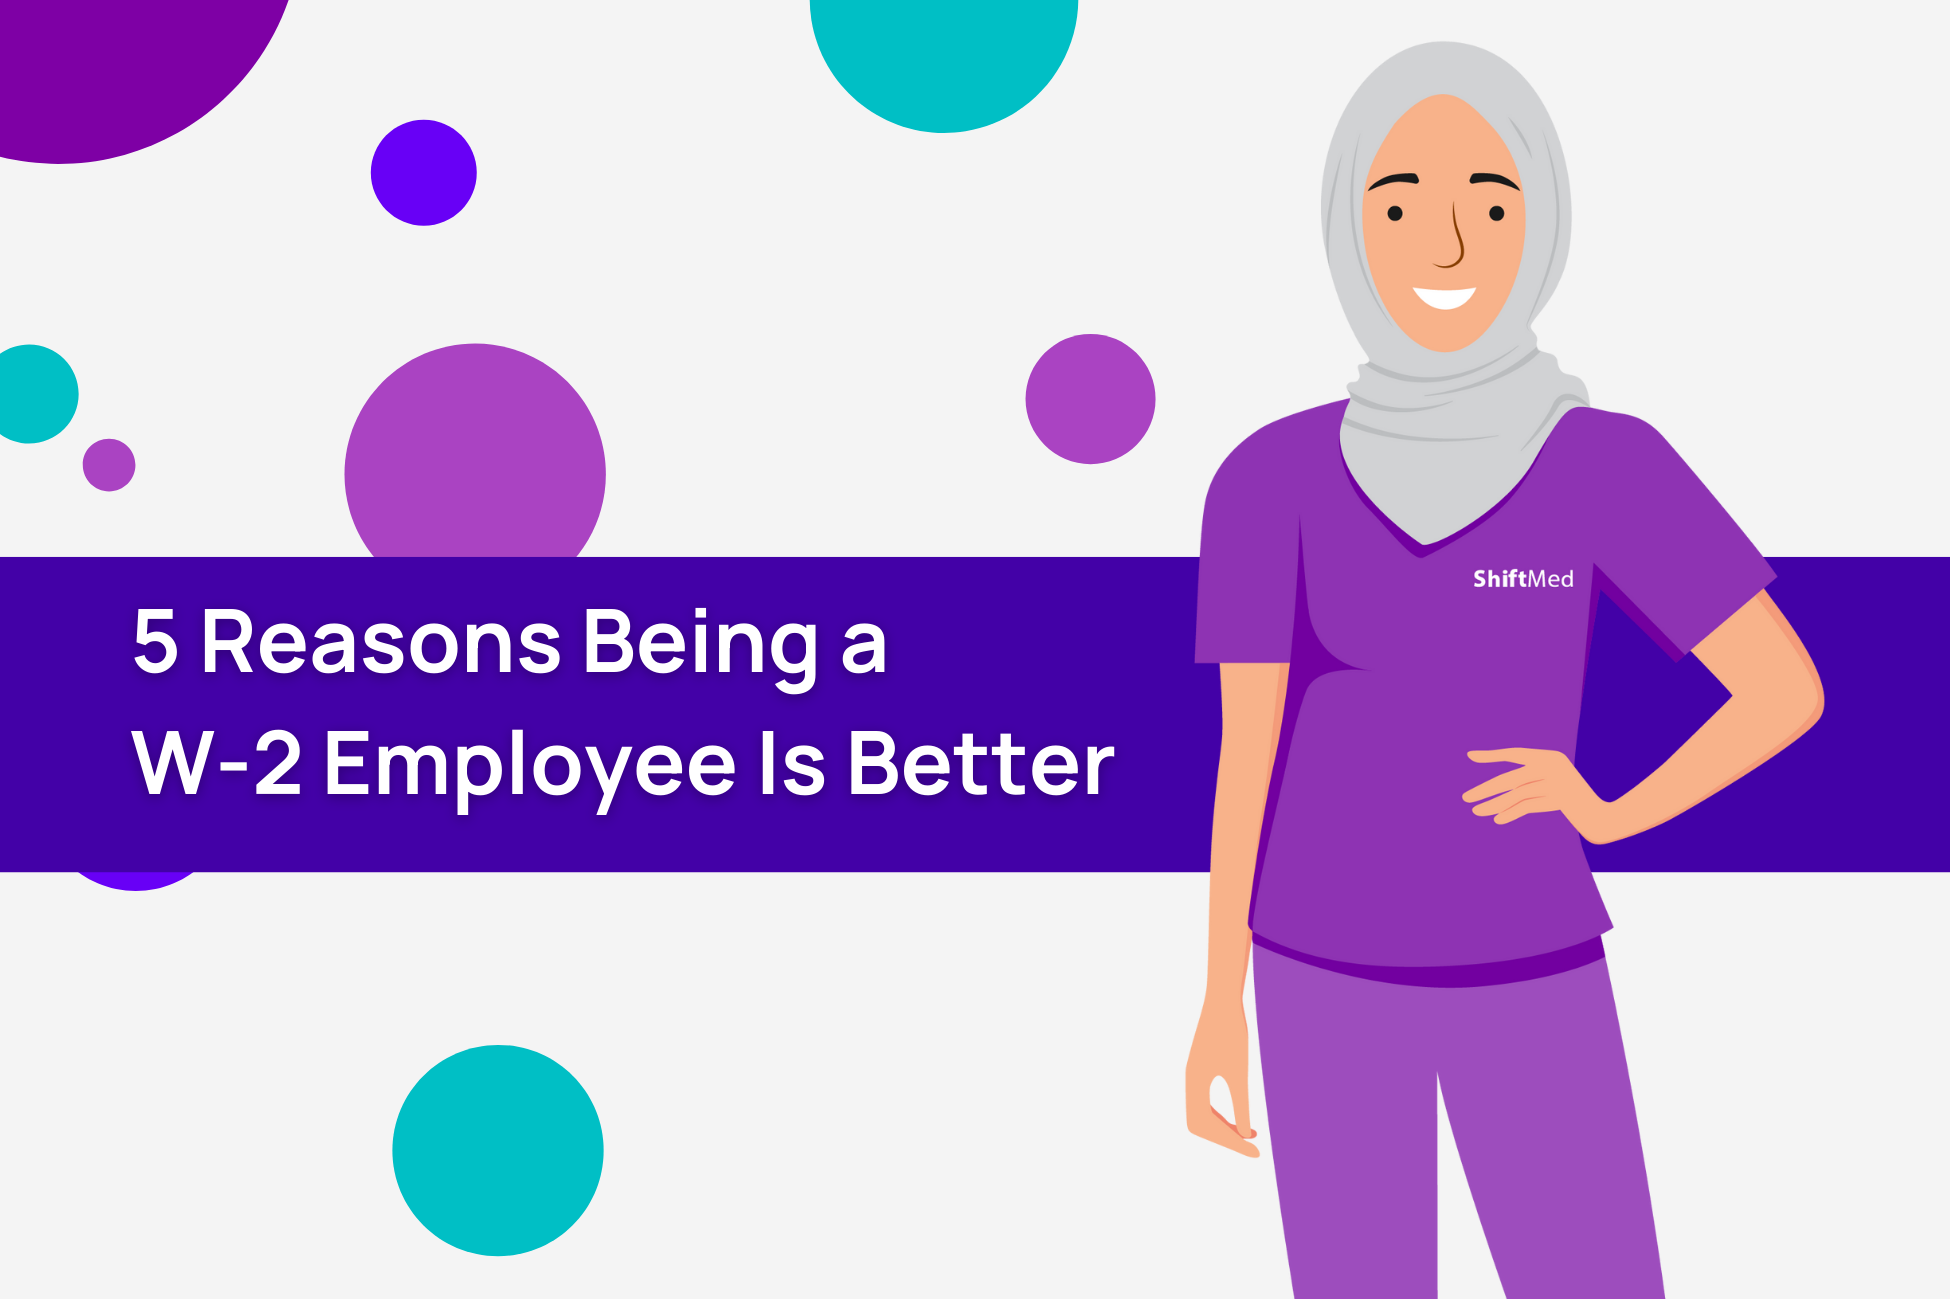 Five reasons why being a W-2 employee is better. 